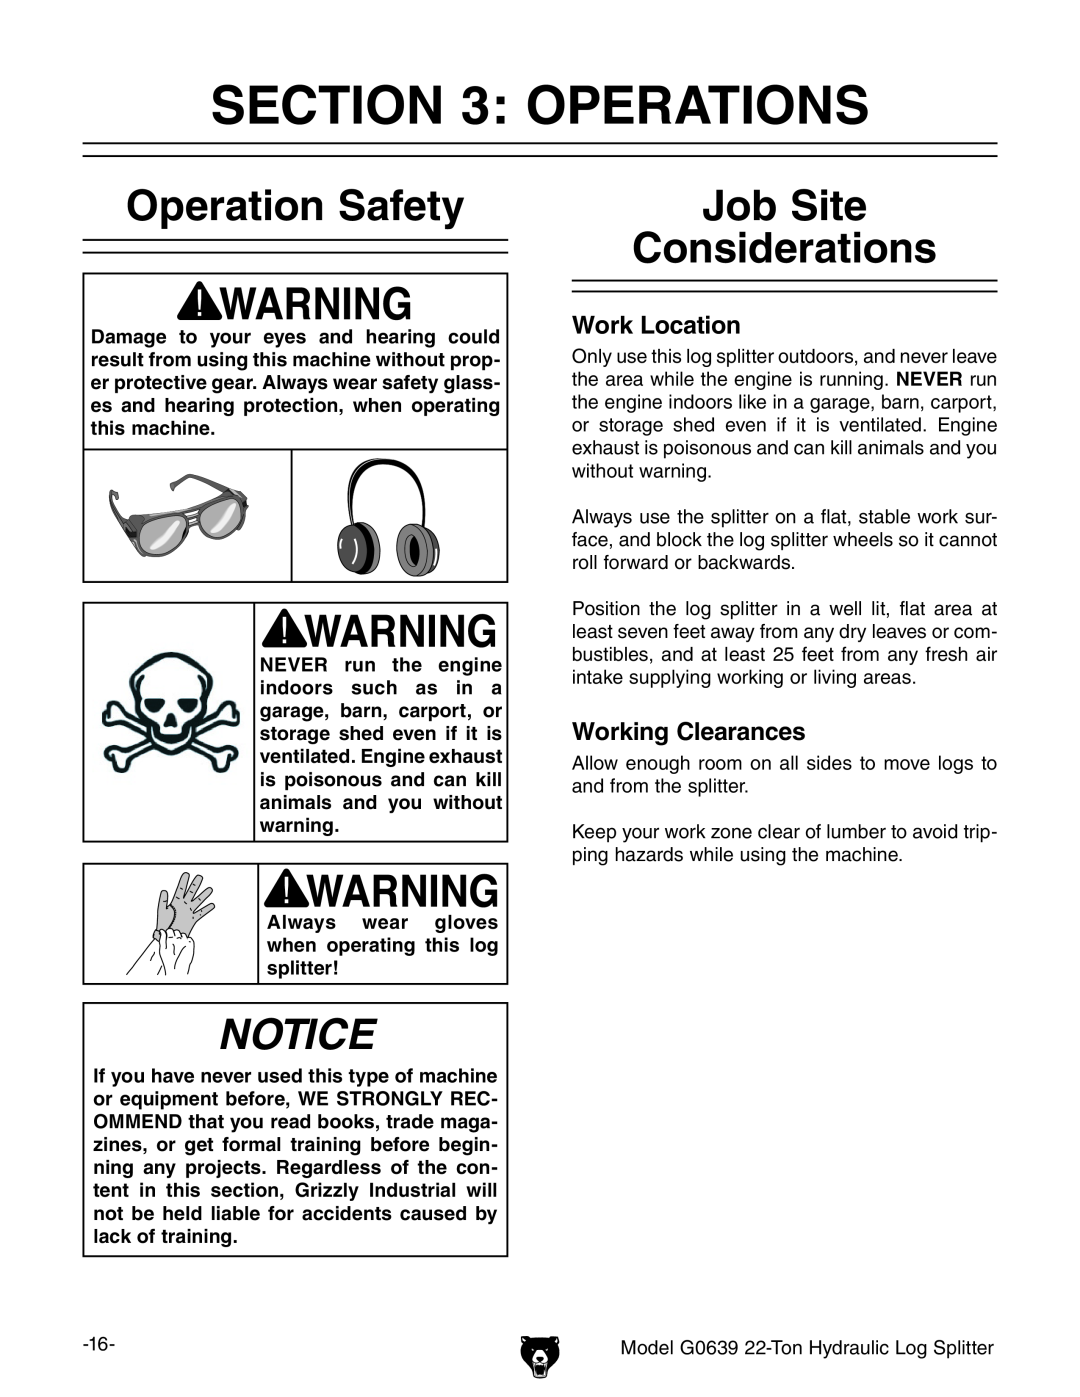 Grizzly G0639 owner manual Operations, Operation Safety, Job Site Considerations, Work Location, Working Clearances 